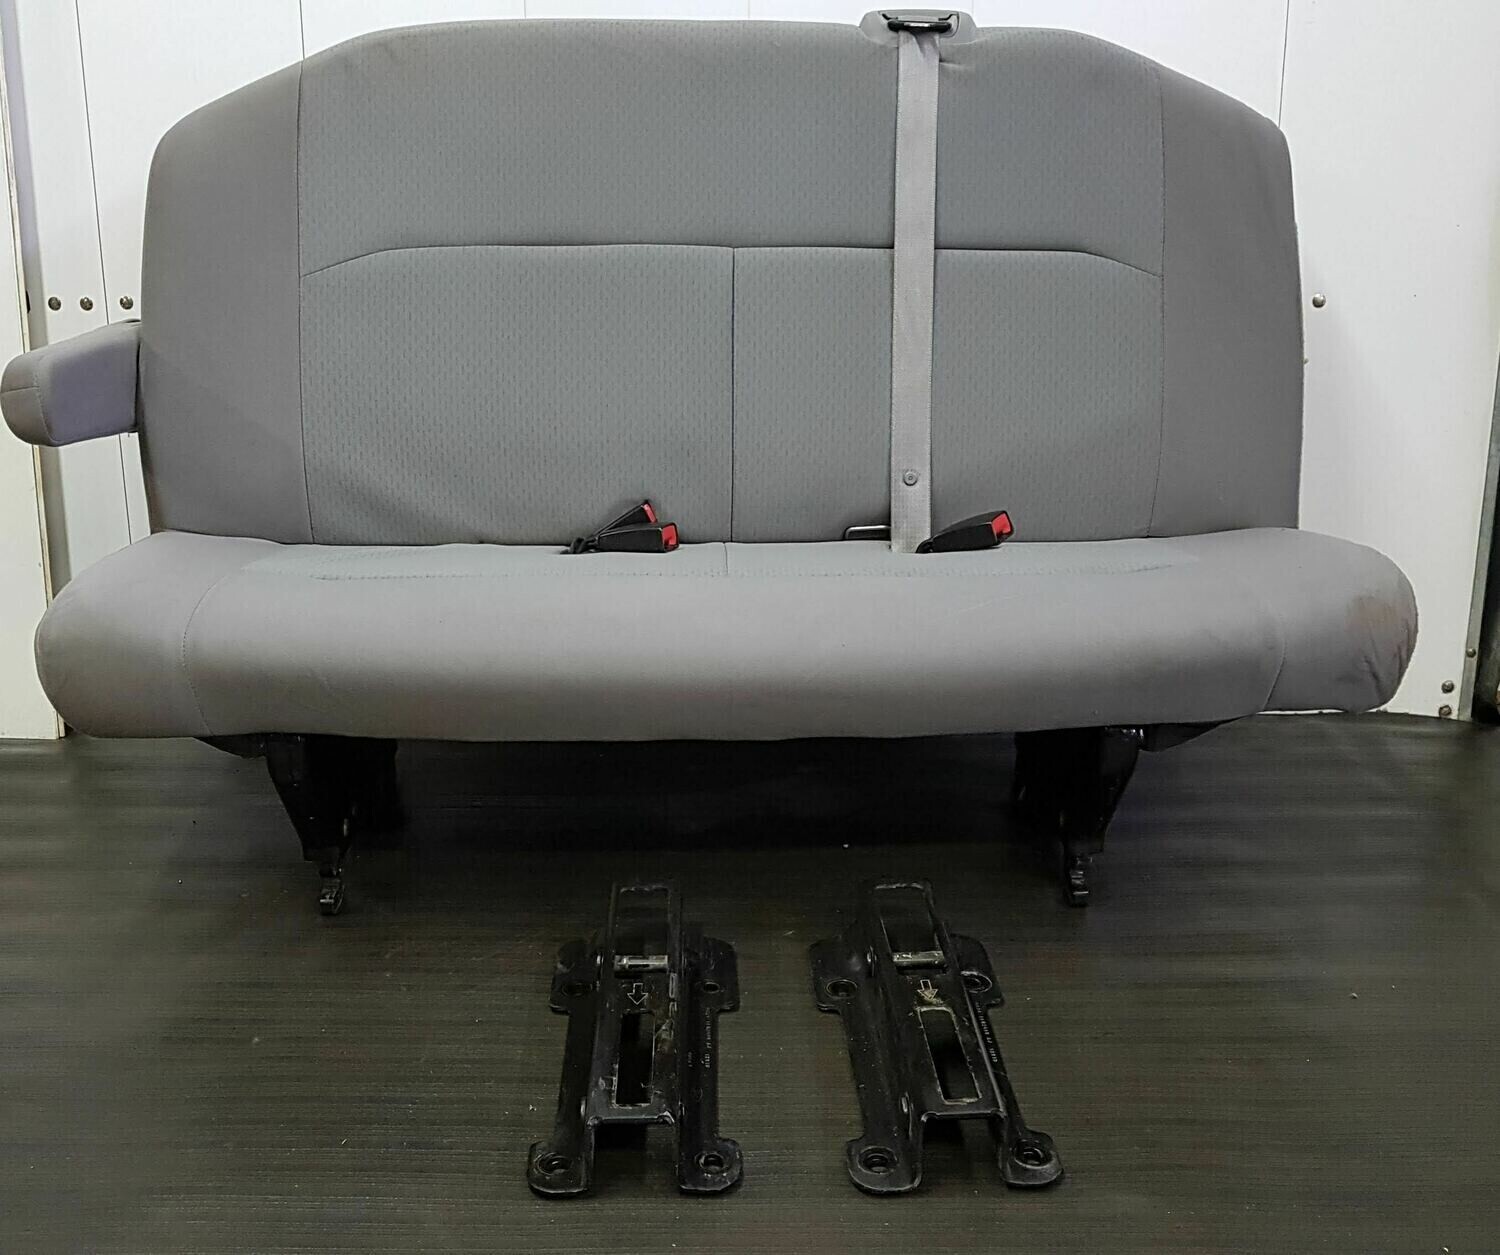 3 Passengers Bench Seat - Removable